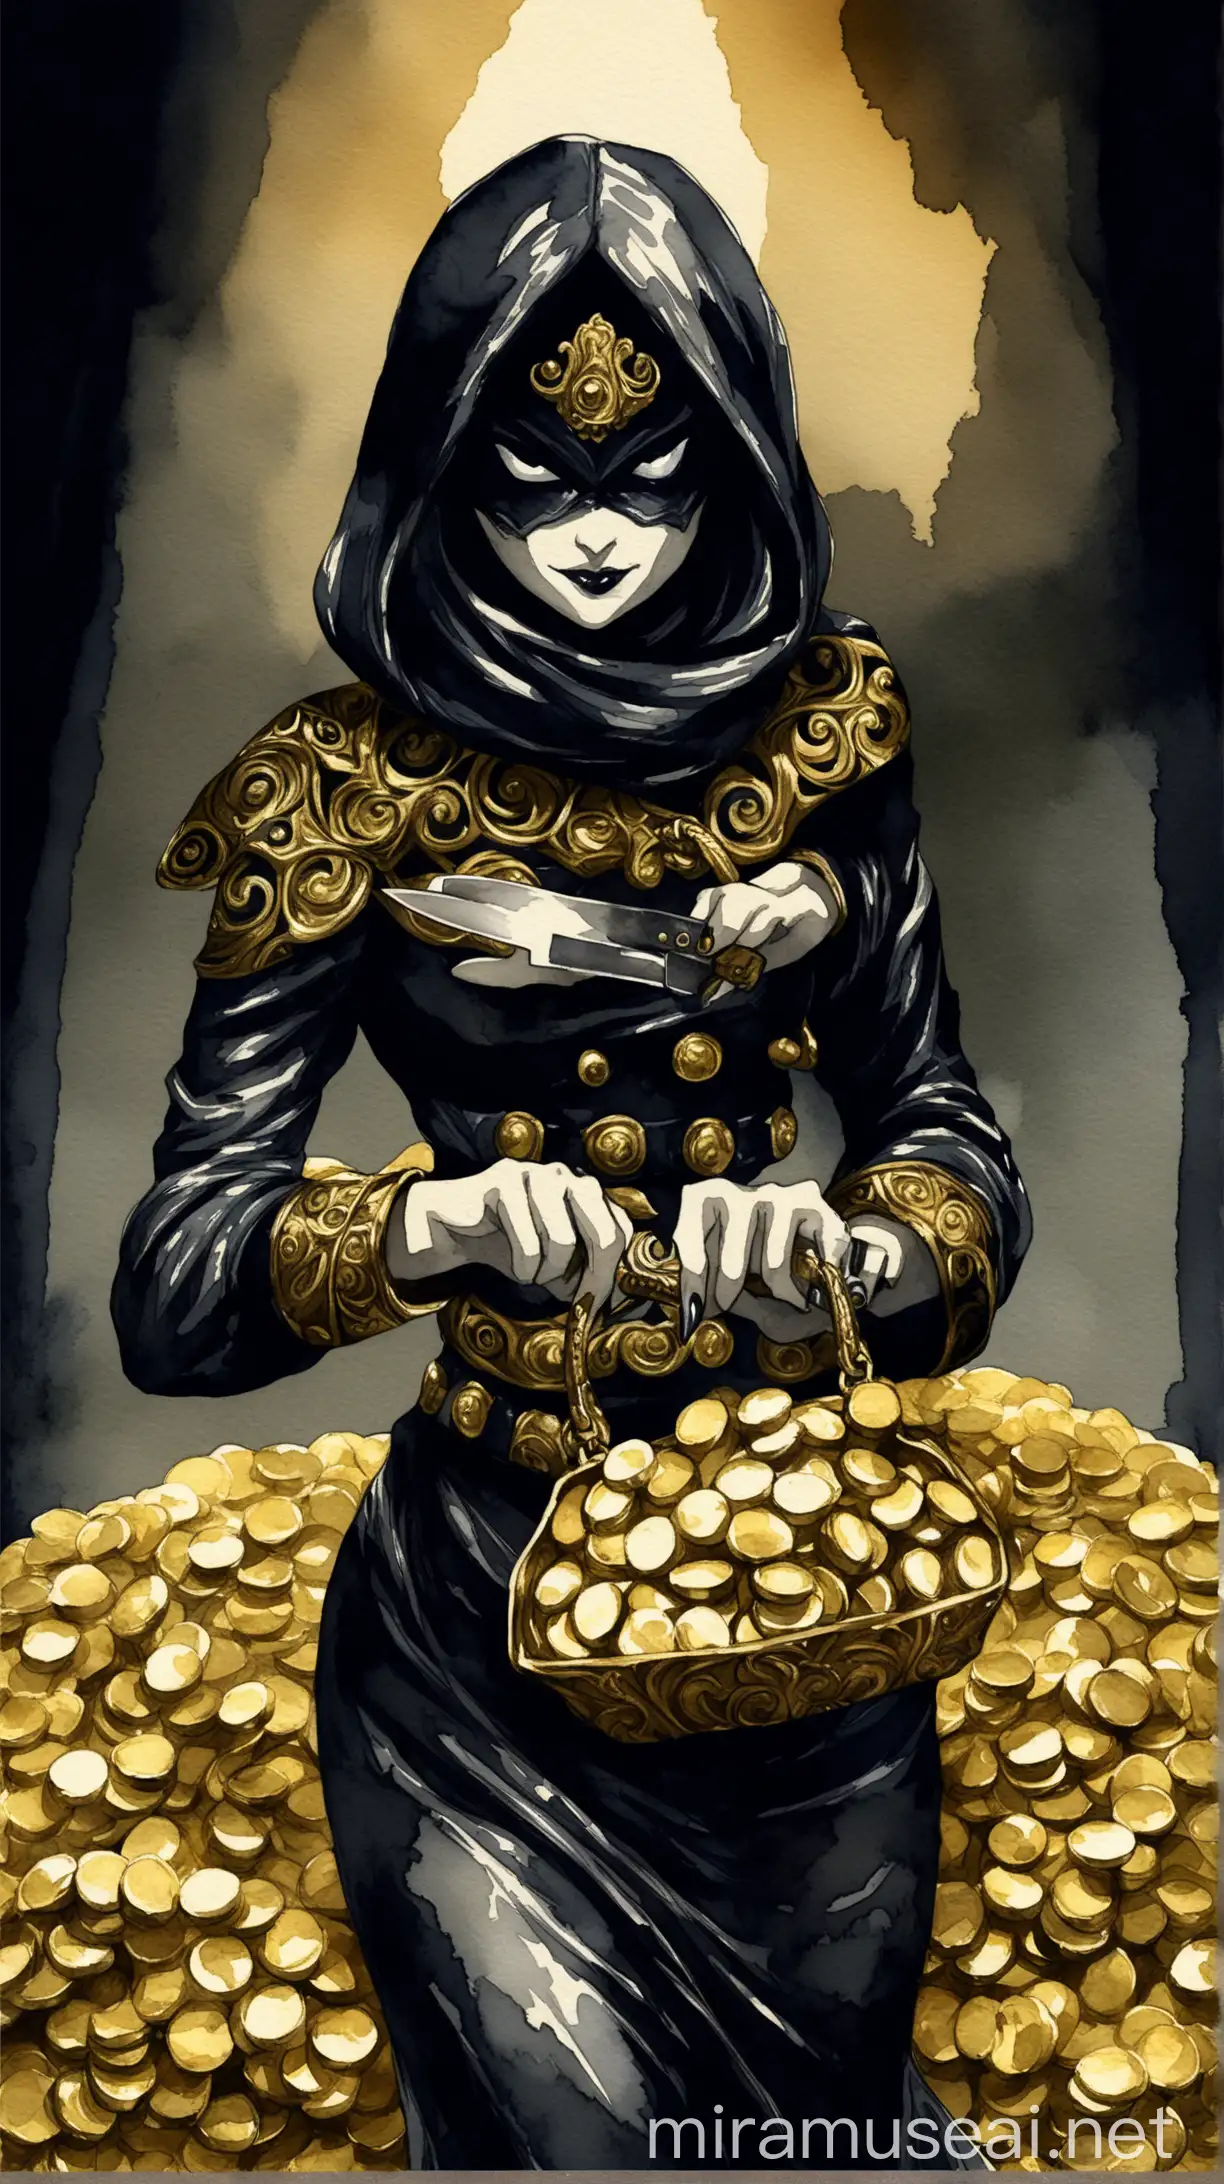 Elegant Evil Woman Thief with Gold and Knife in Dark Watercolor Scene